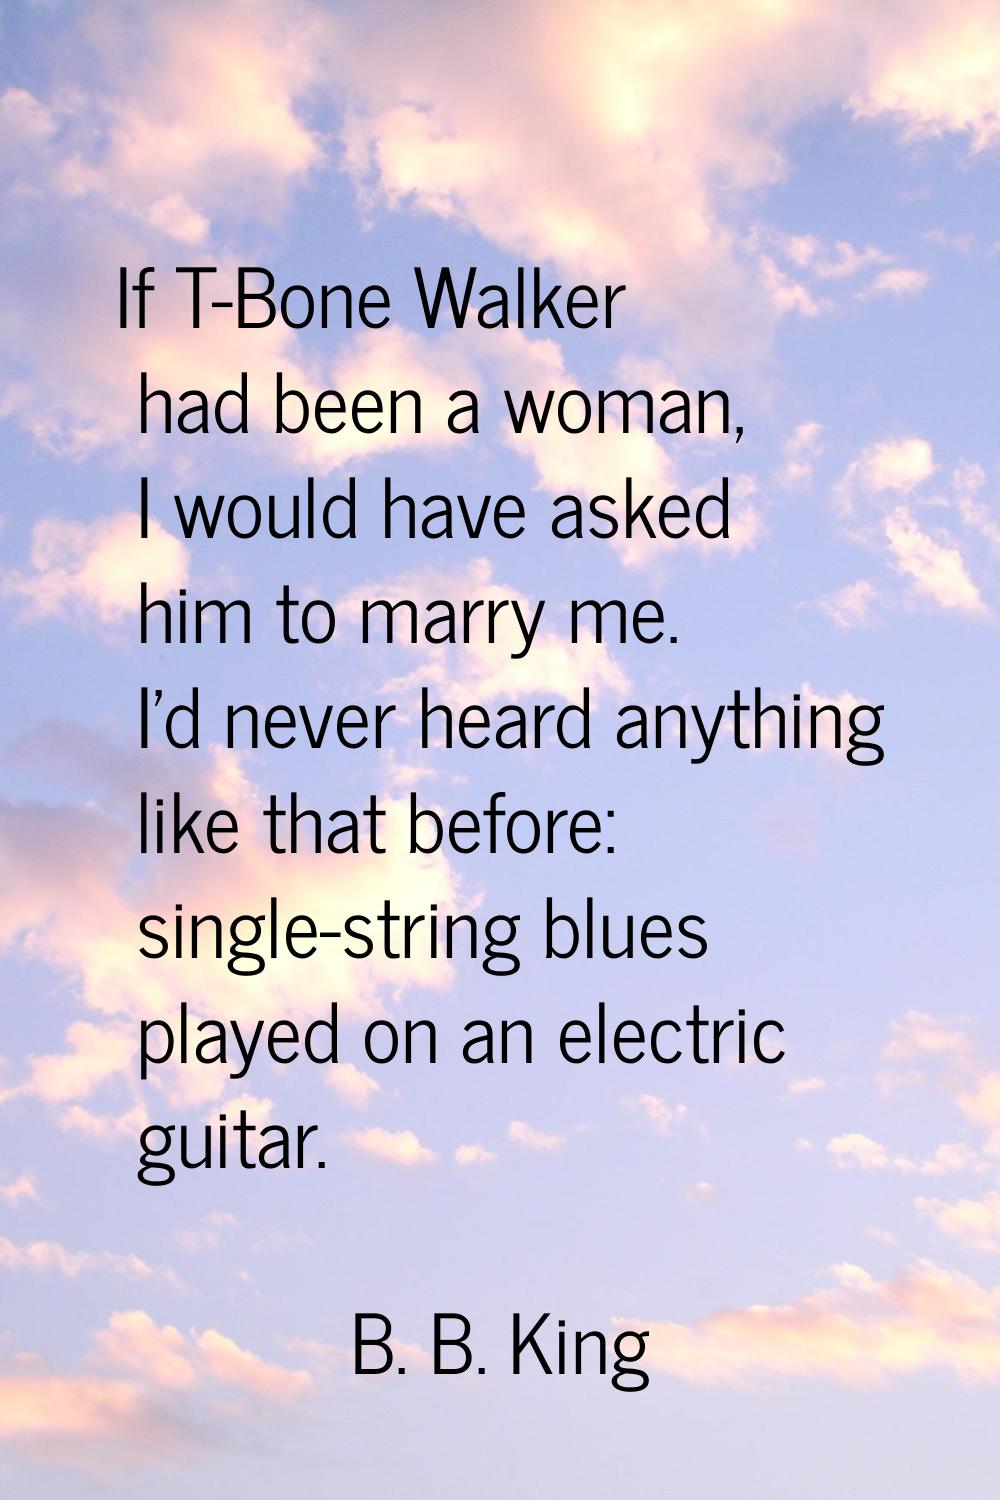 If T-Bone Walker had been a woman, I would have asked him to marry me. I'd never heard anything lik